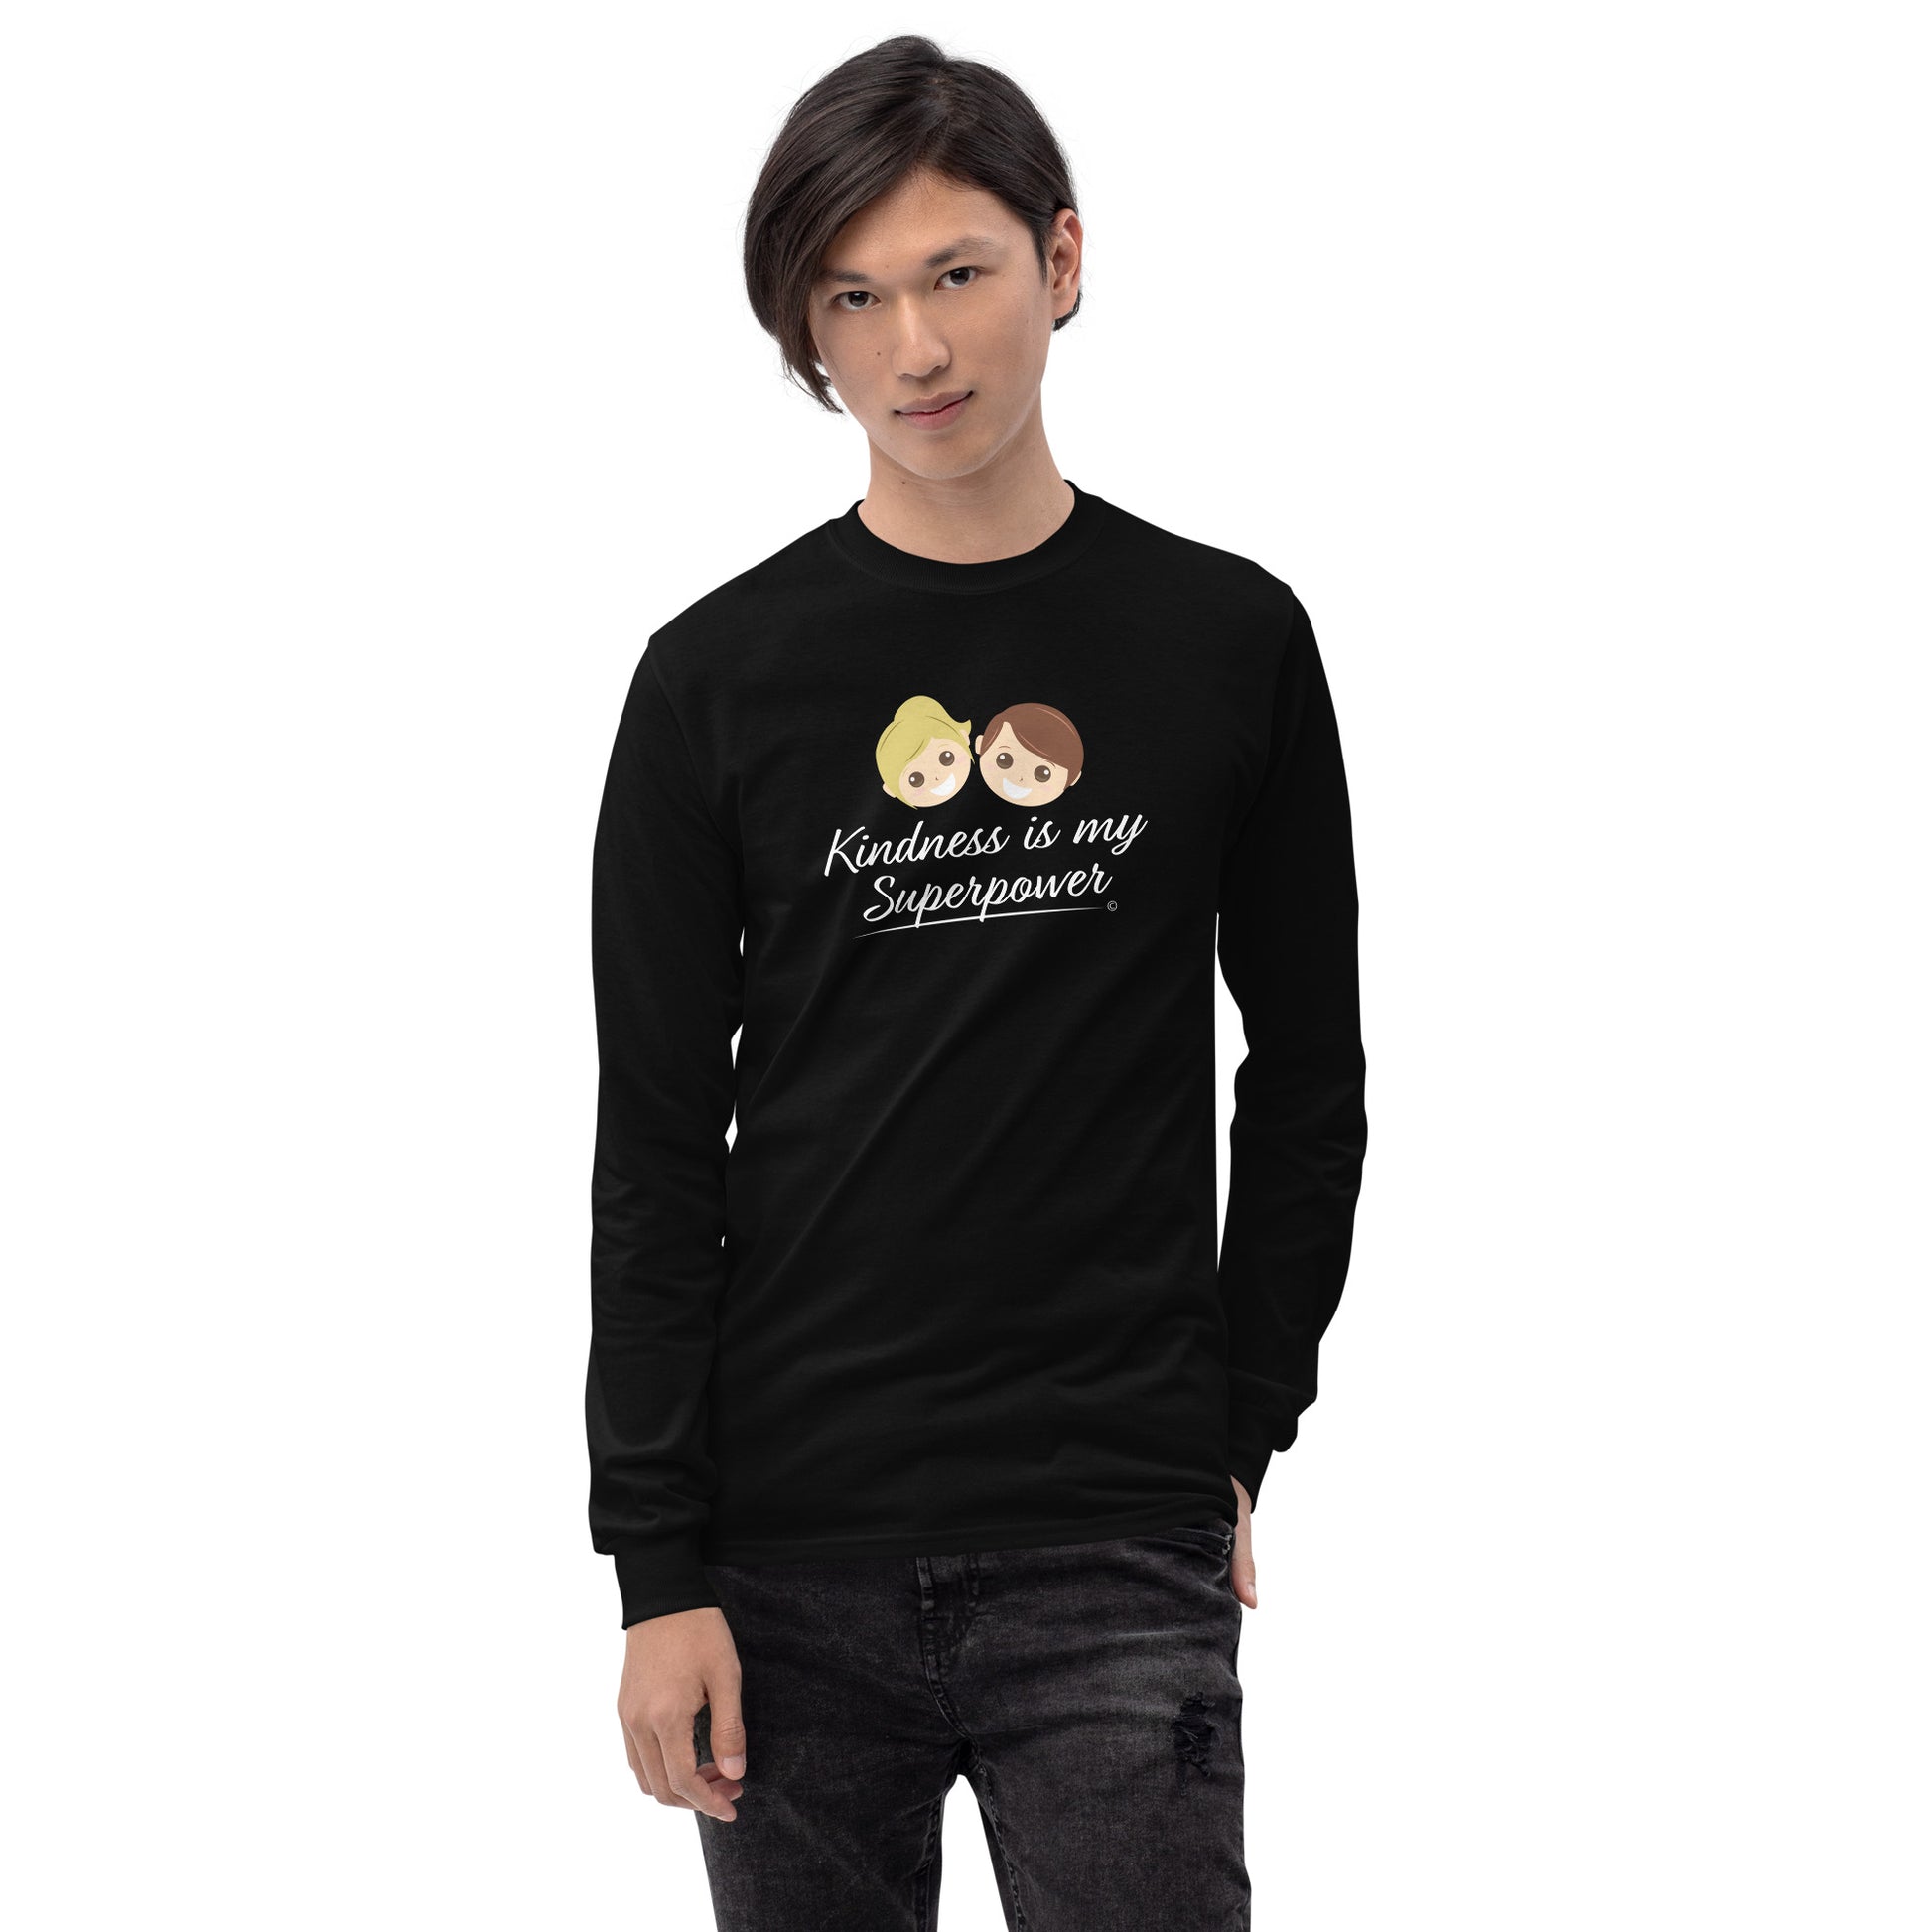 A confident young man wearing a stylish long sleeve shirt in black, featuring the empowering quote 'Kindness is my Superpower' in bold lettering.